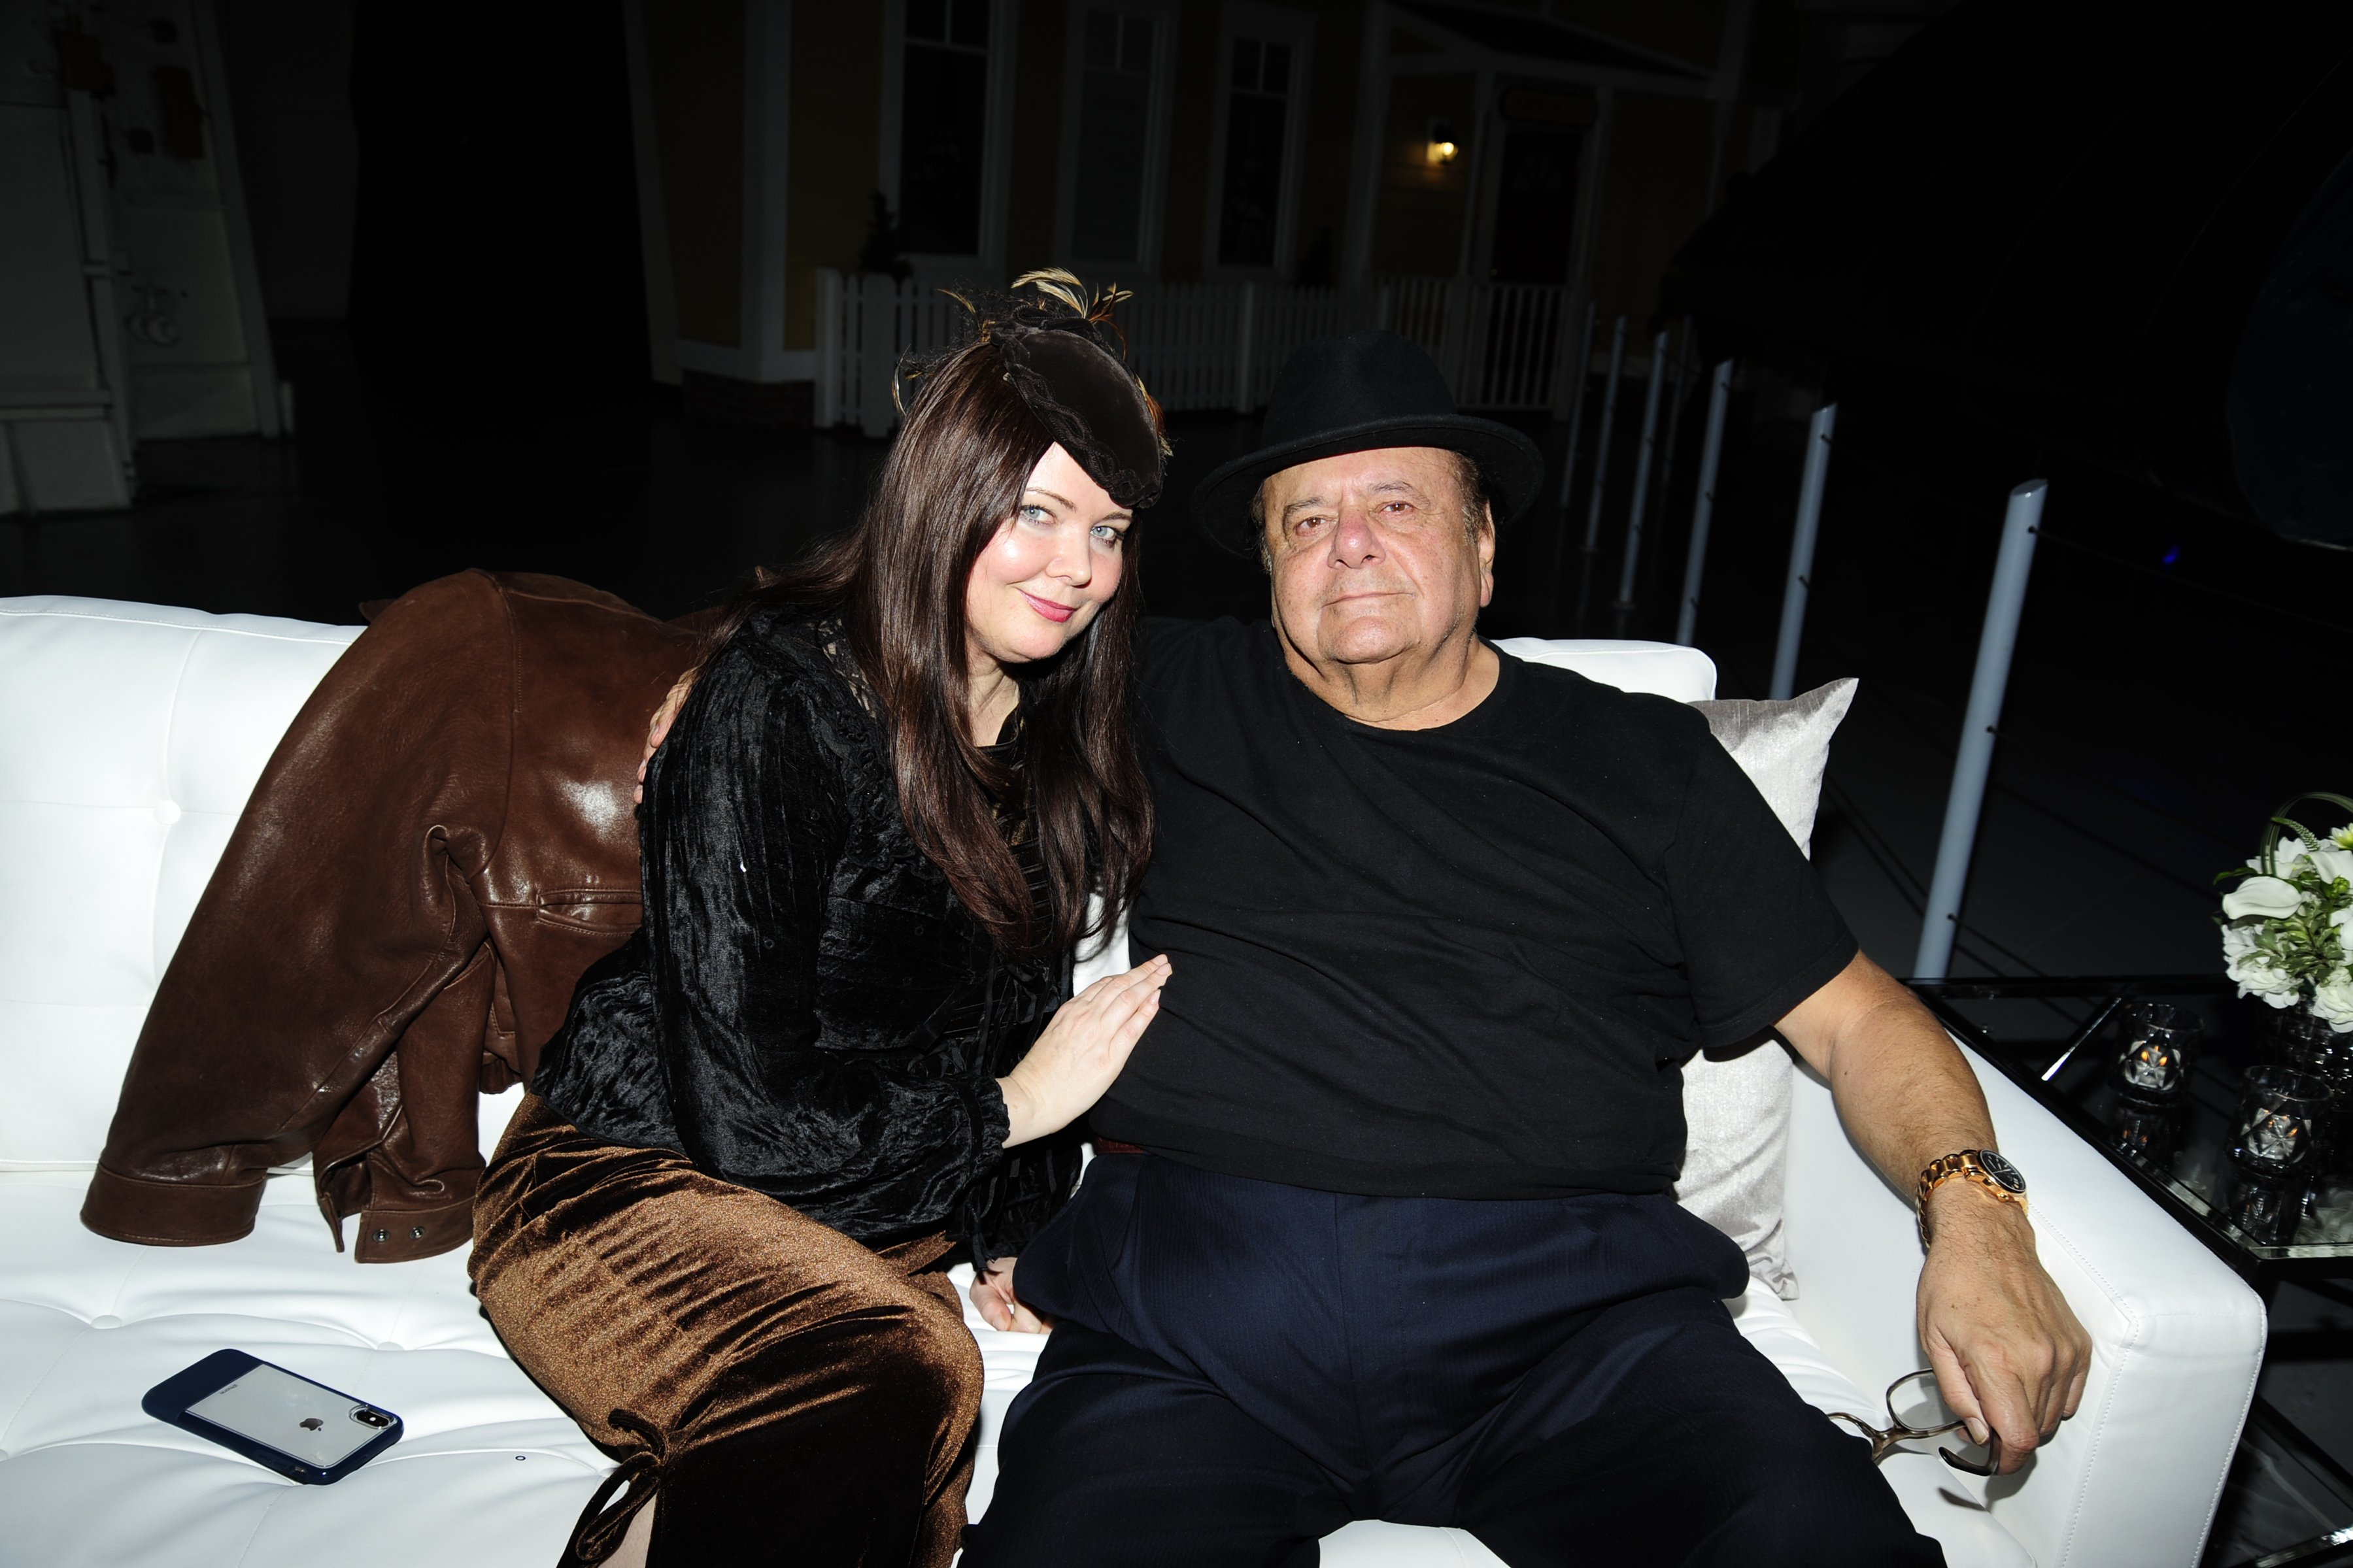 Dee Dee Sorvino and Paul Sorvino attend Lionsgate With The Cinema Society Host The After Party For The World Premiere Of "Hunter Killer" at Intrepid Sea-Air-Space Museum, NYC on October 22, 2018 in New York City. | Source: Getty Images 